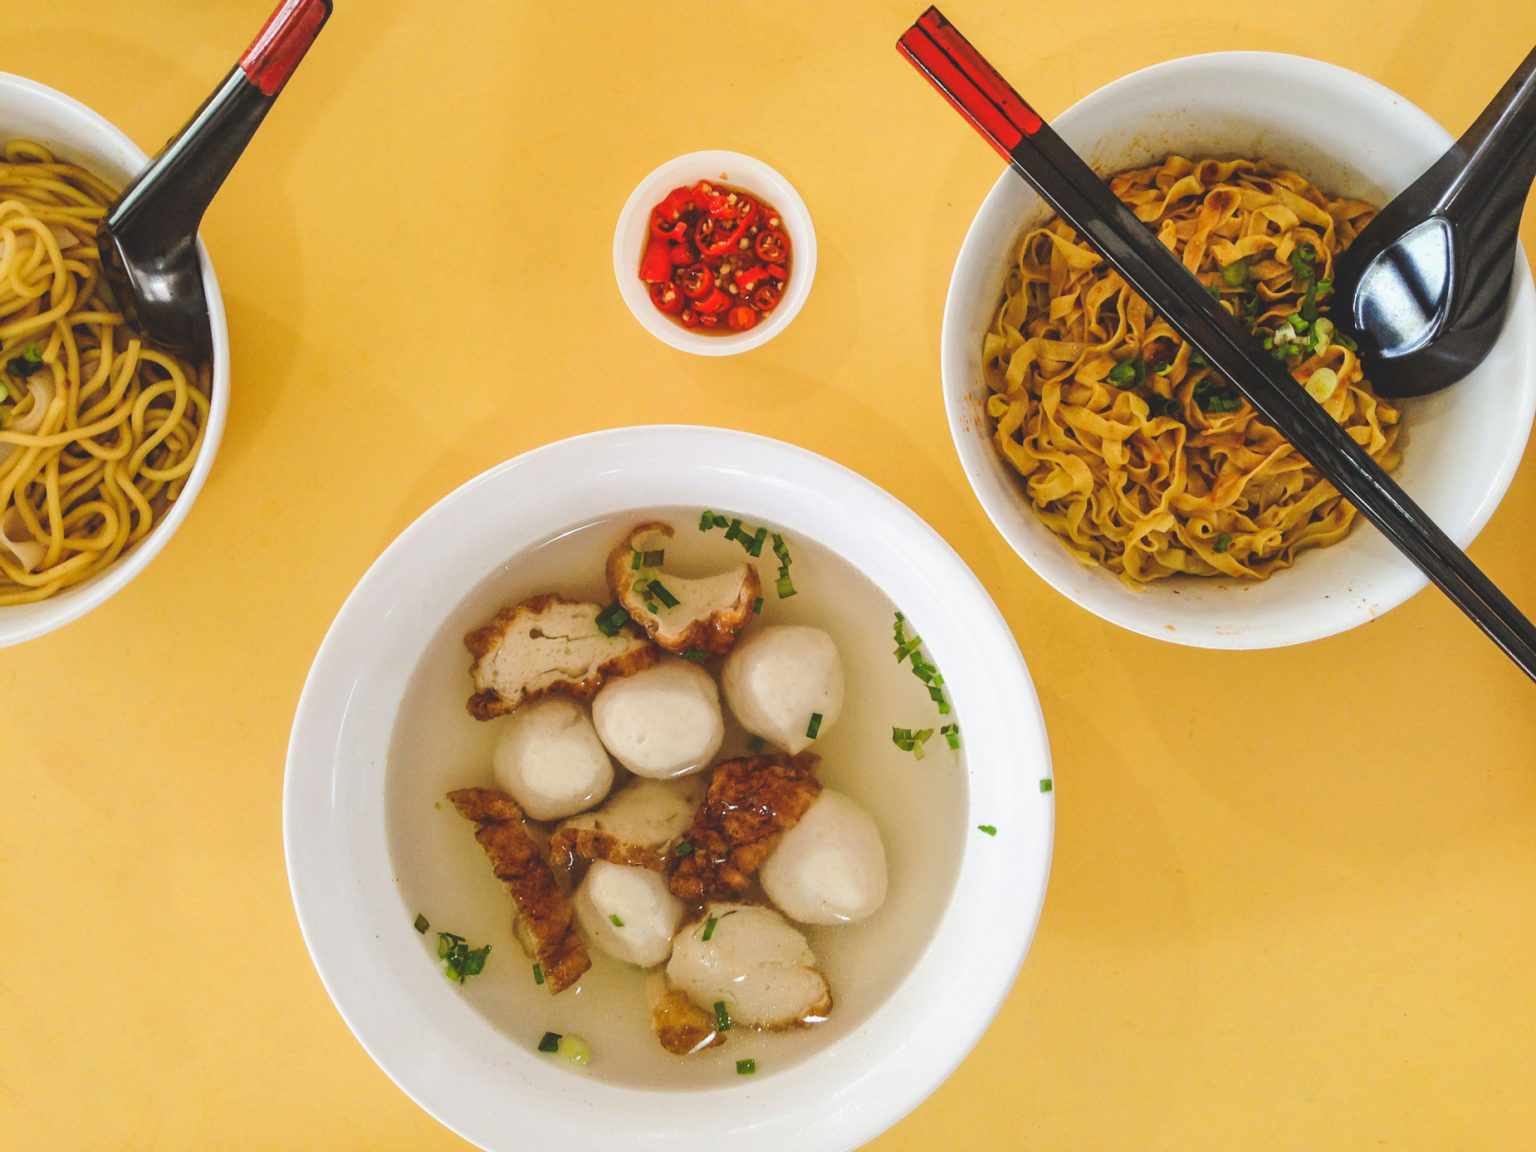 Bowls of Singaporean noodles and soup on a bright yellow table.